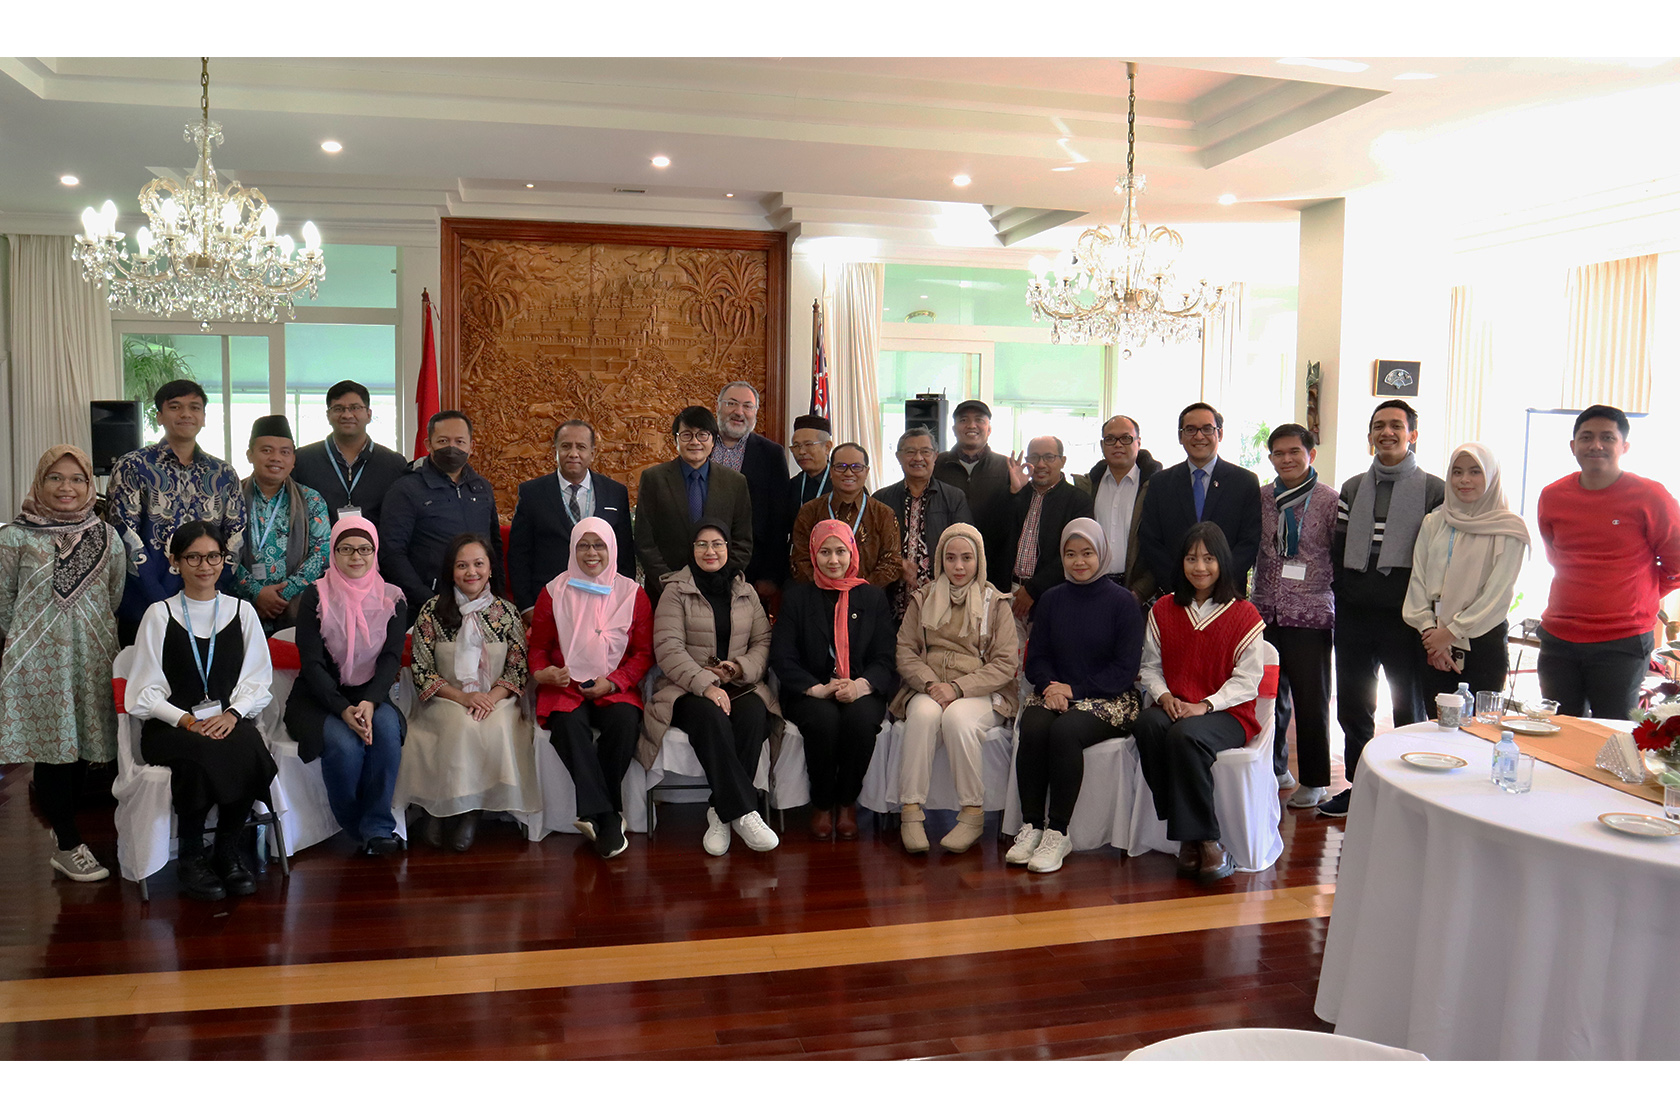 A group photo of participants with Siswo Pramono, Ambassador of Indonesia to Australia inside the Indonesian Embassy in Canberra building